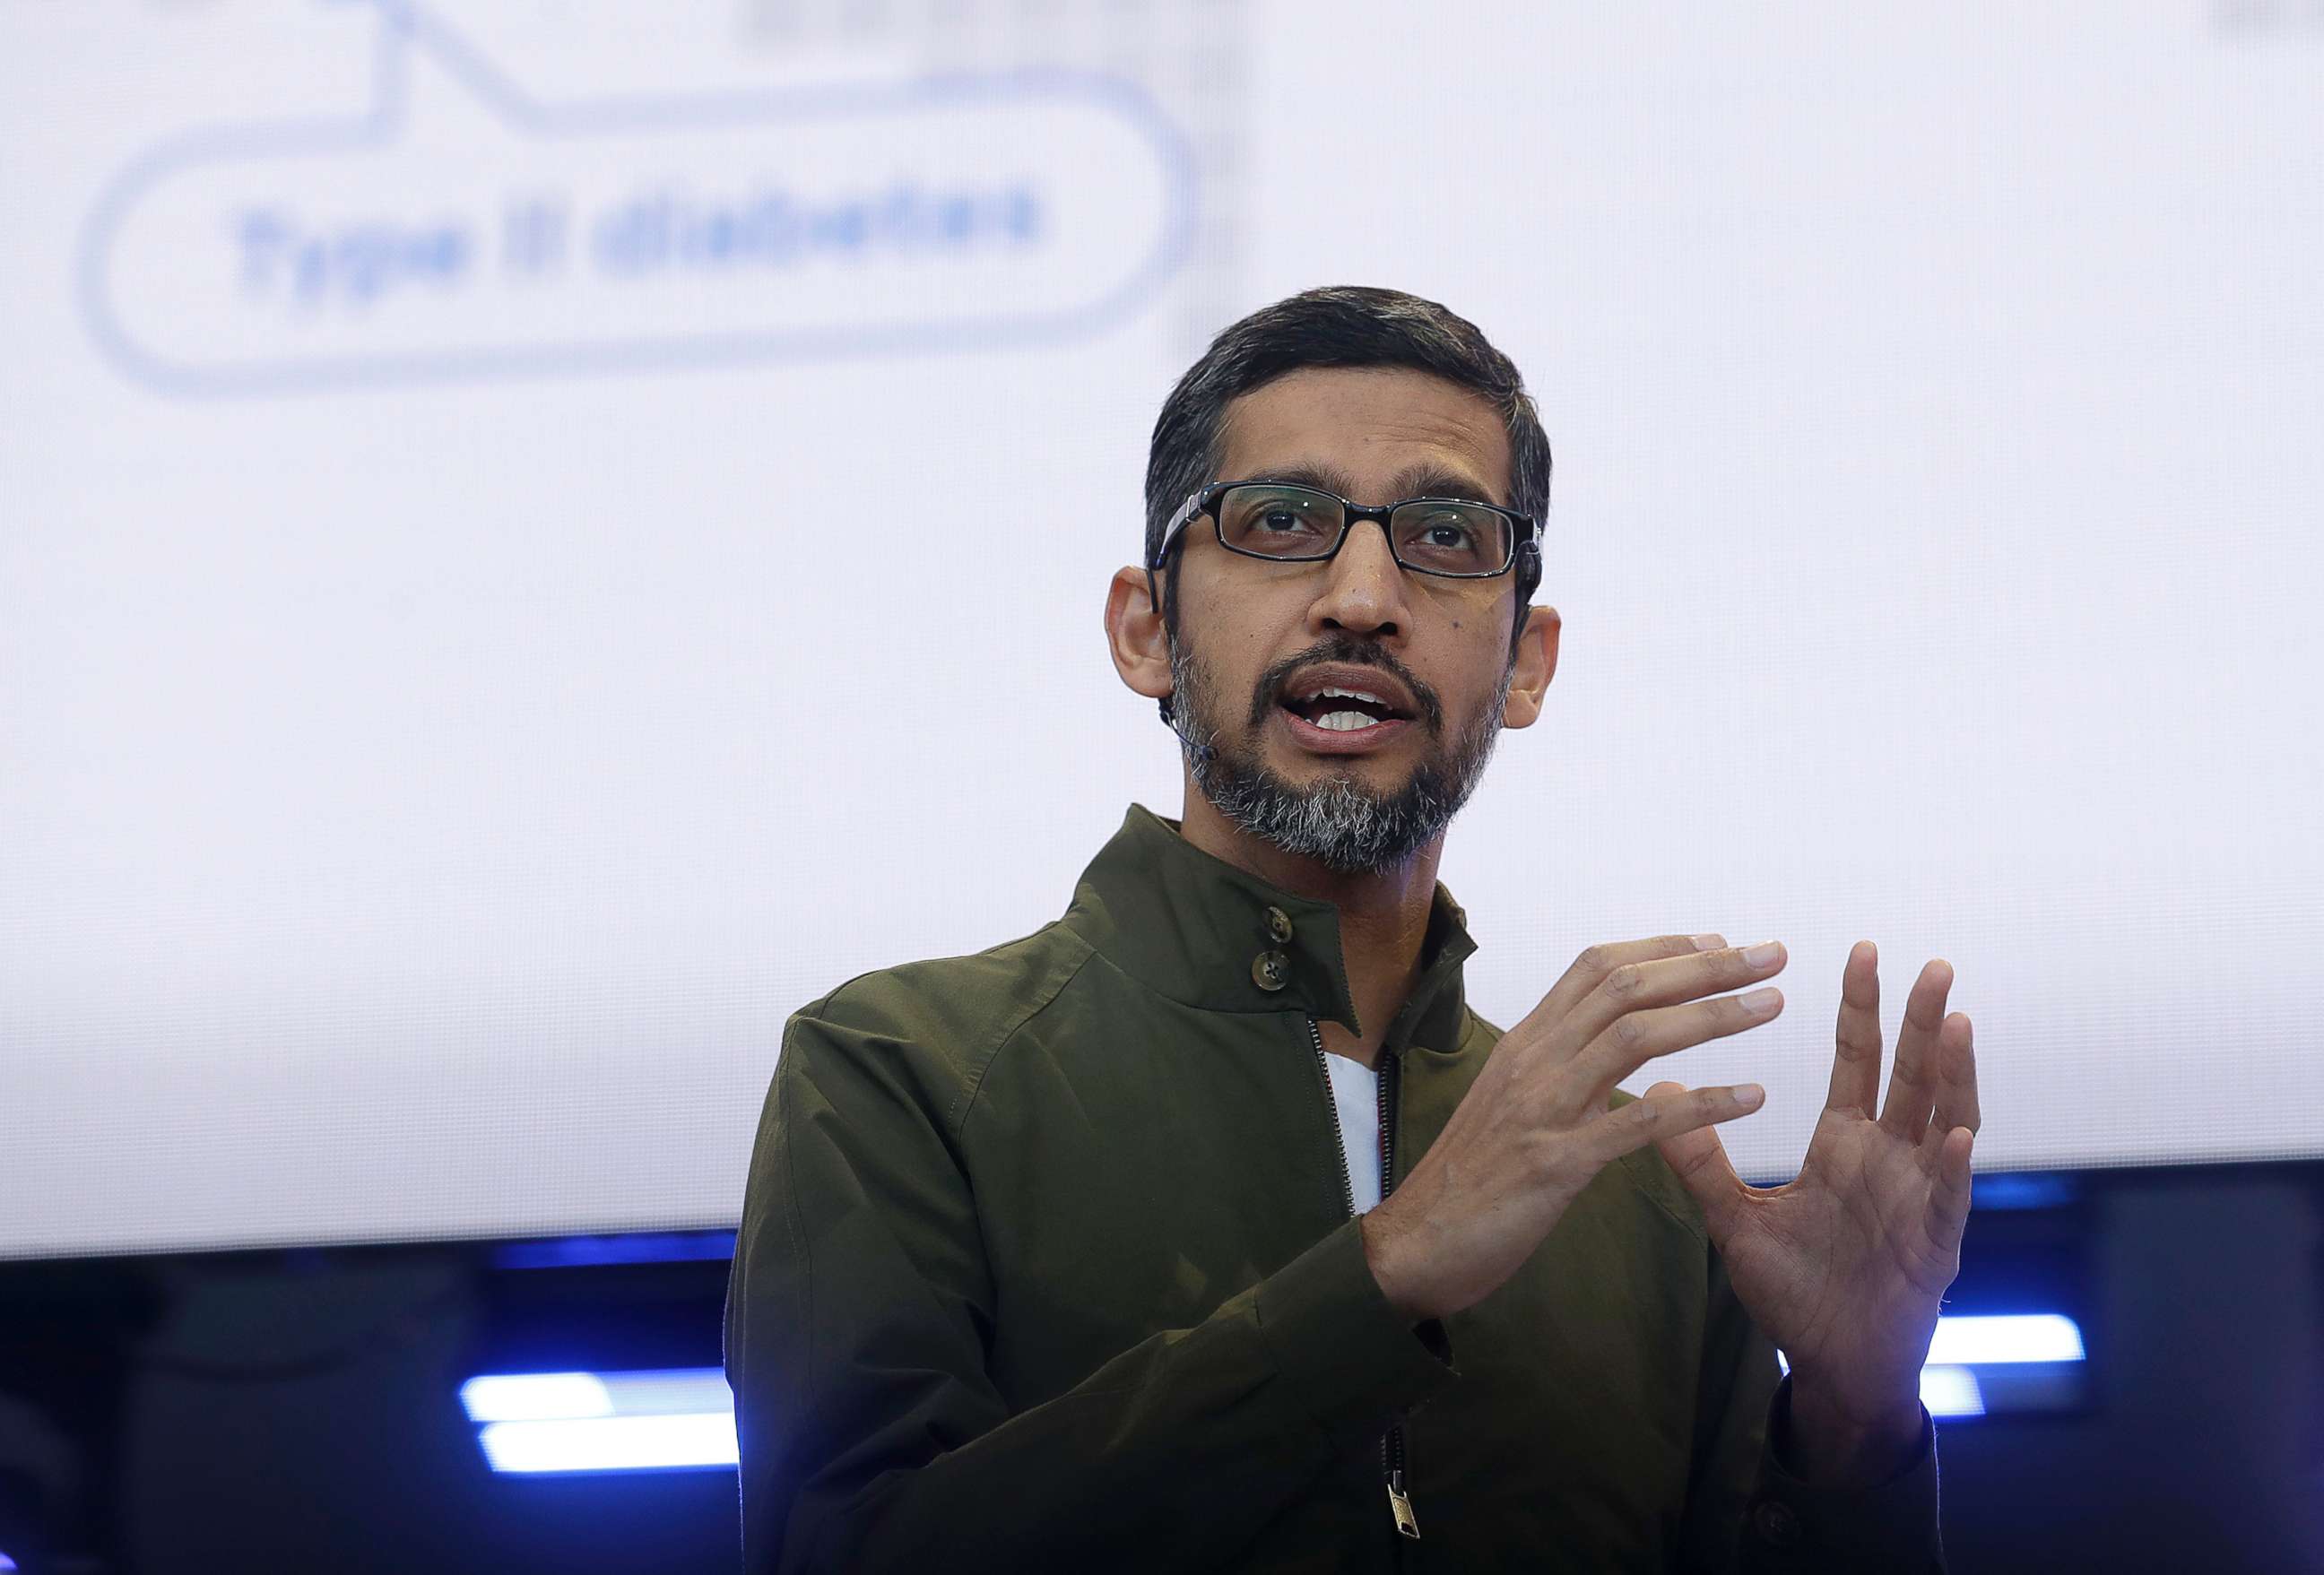 PHOTO: Google CEO Sundar Pichai speaks at the Google I/O conference in Mountain View, Calif., May 8, 2018.